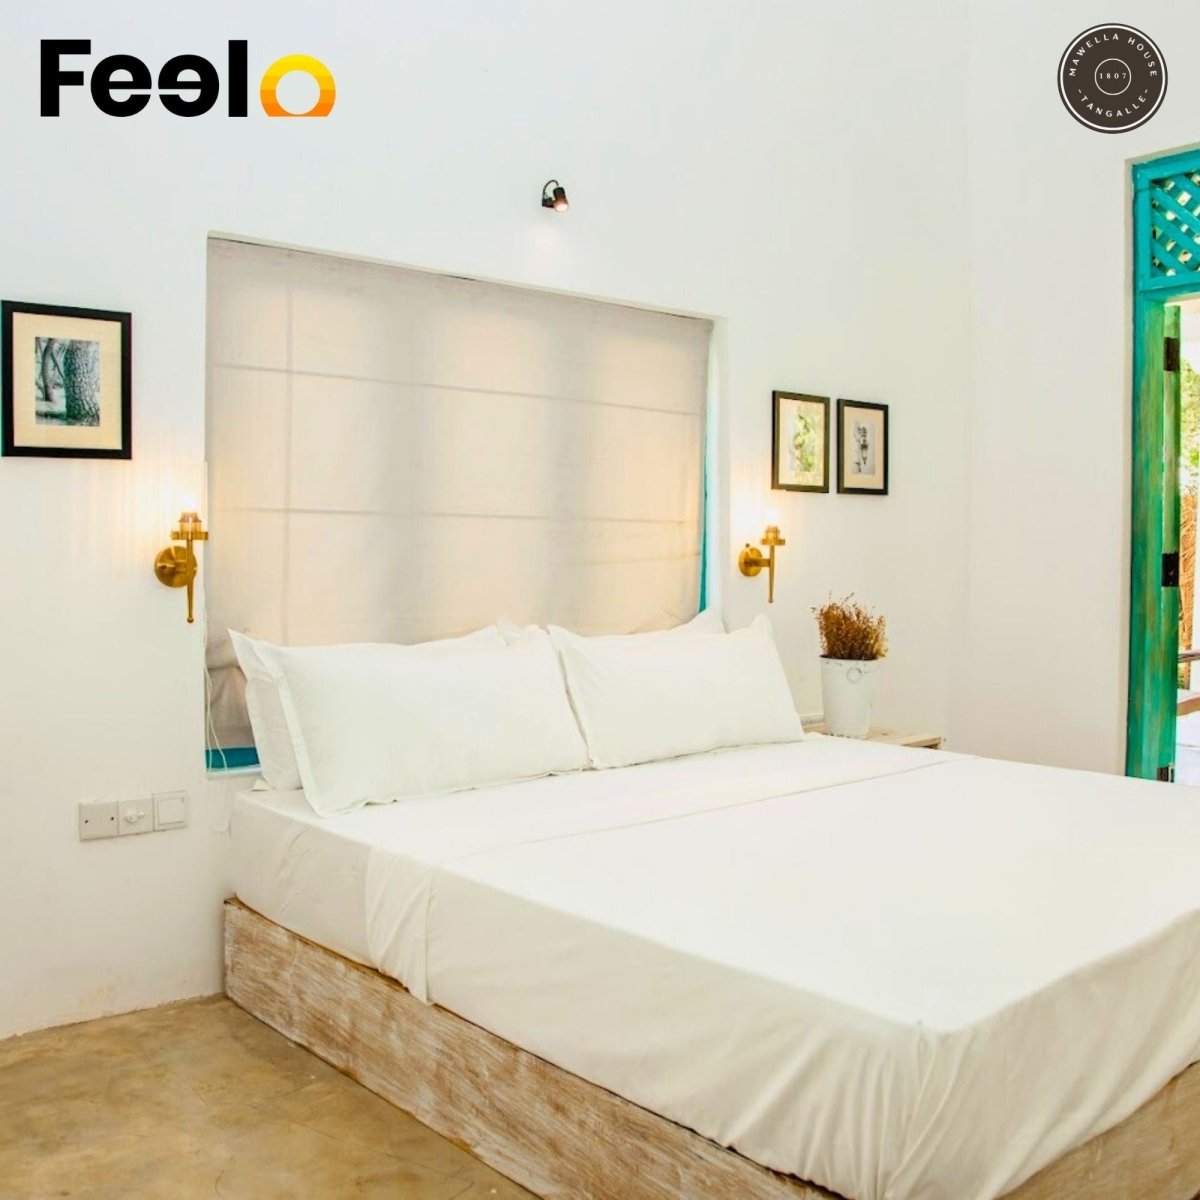 1x Night stay at a Colonial Villa near Mawella Beach for 2 people - Mawella House 1807, Tangalle | Feelo